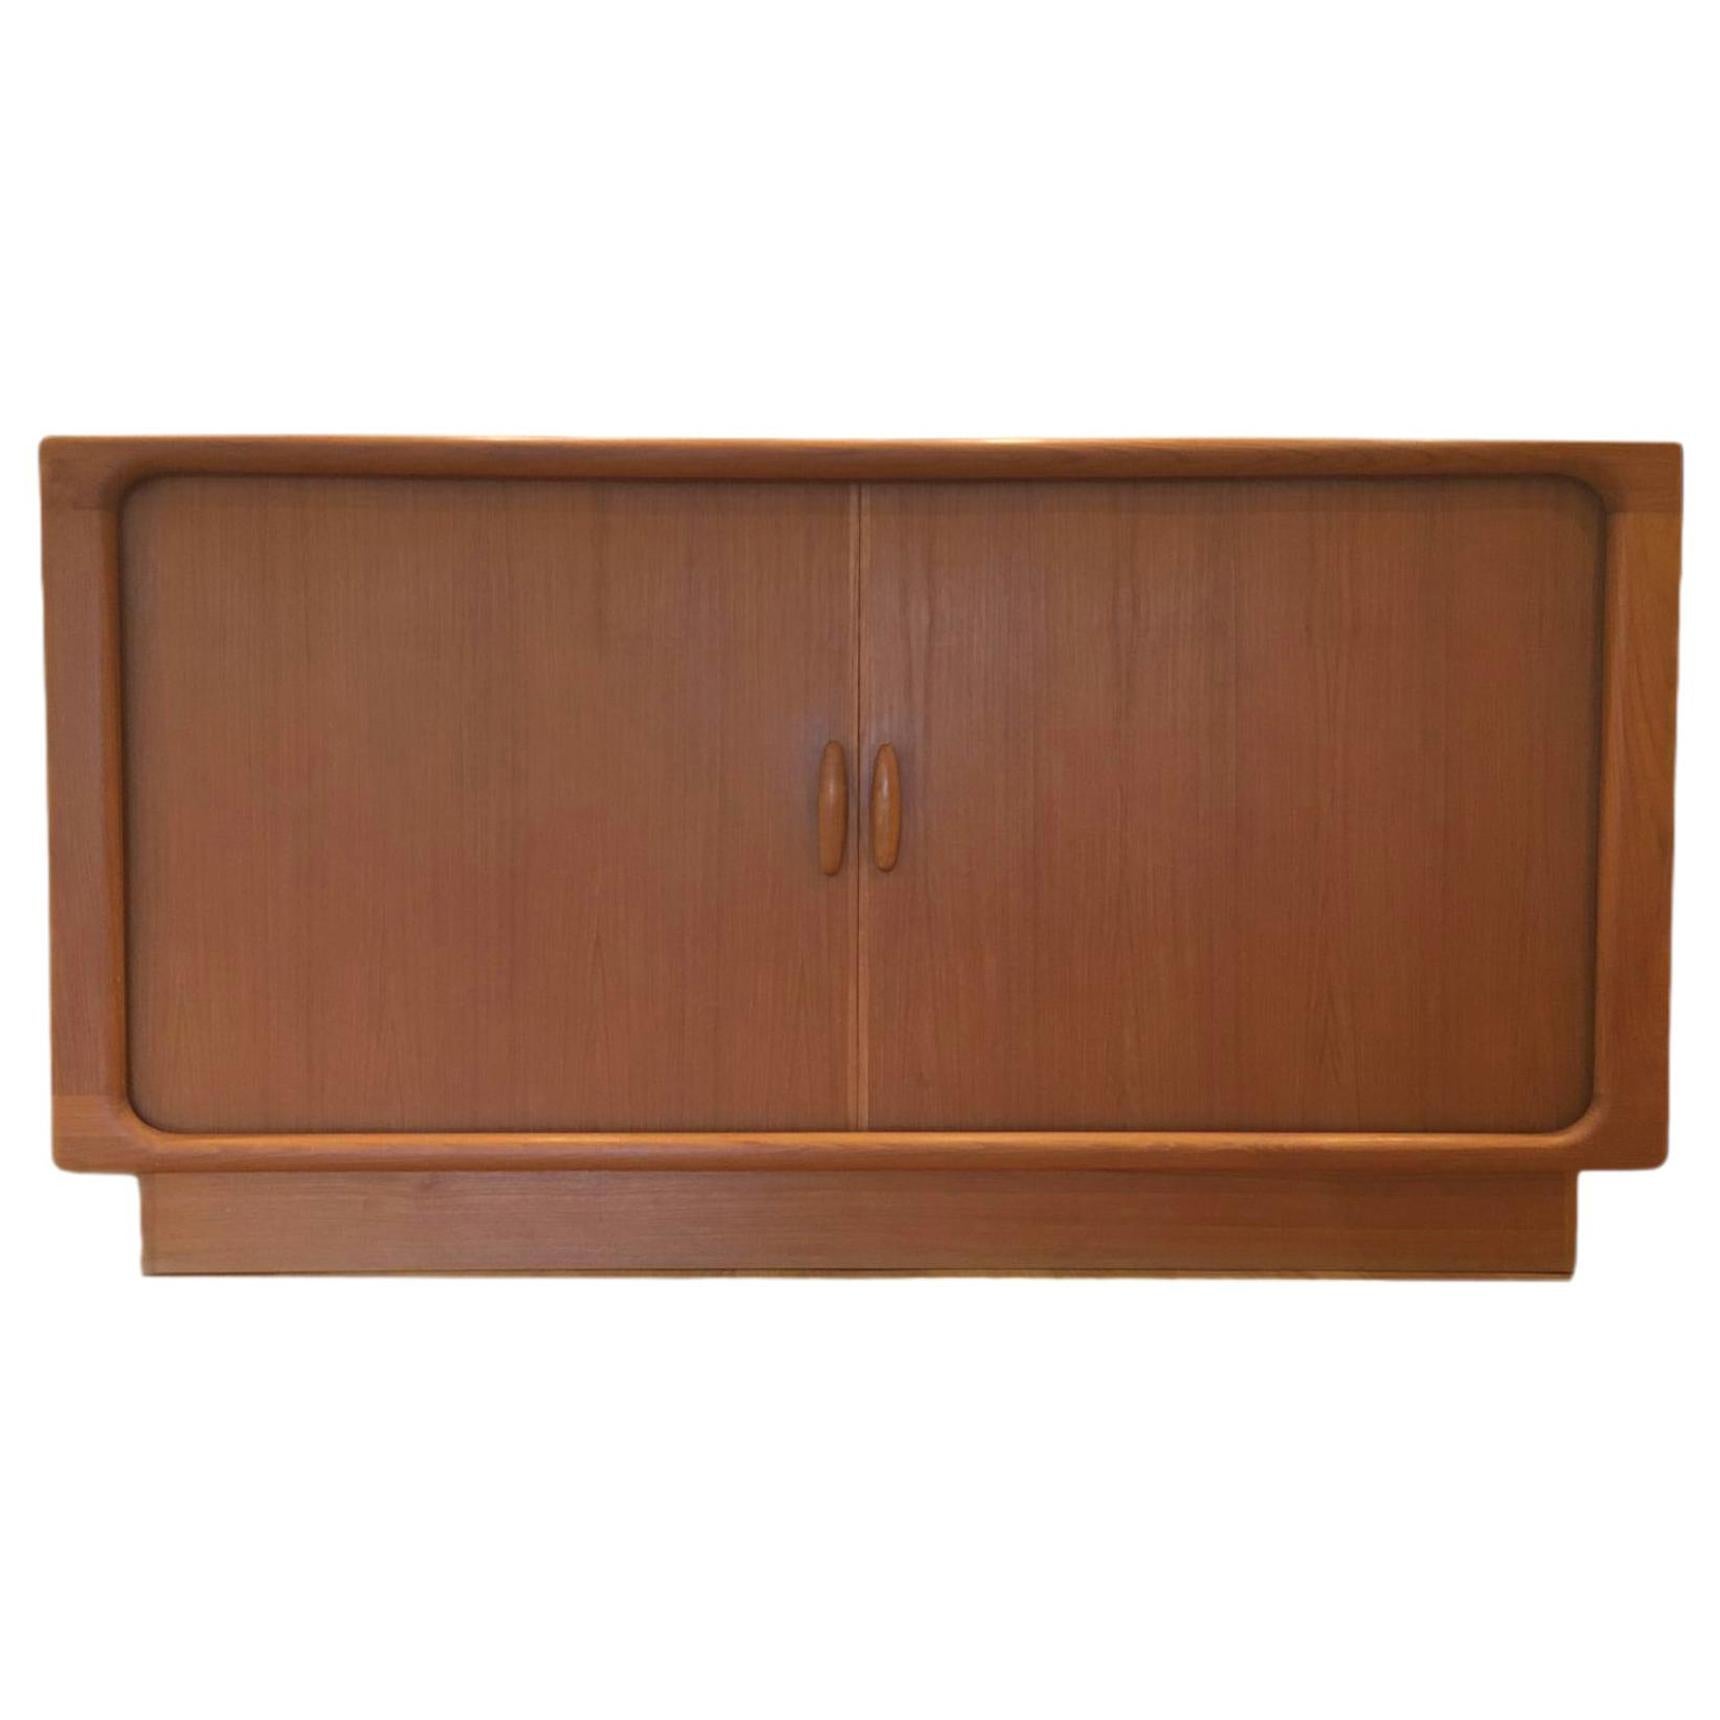 Danish Credenza with Tambour Doors by Dyrlund Denmark, 1960s For Sale